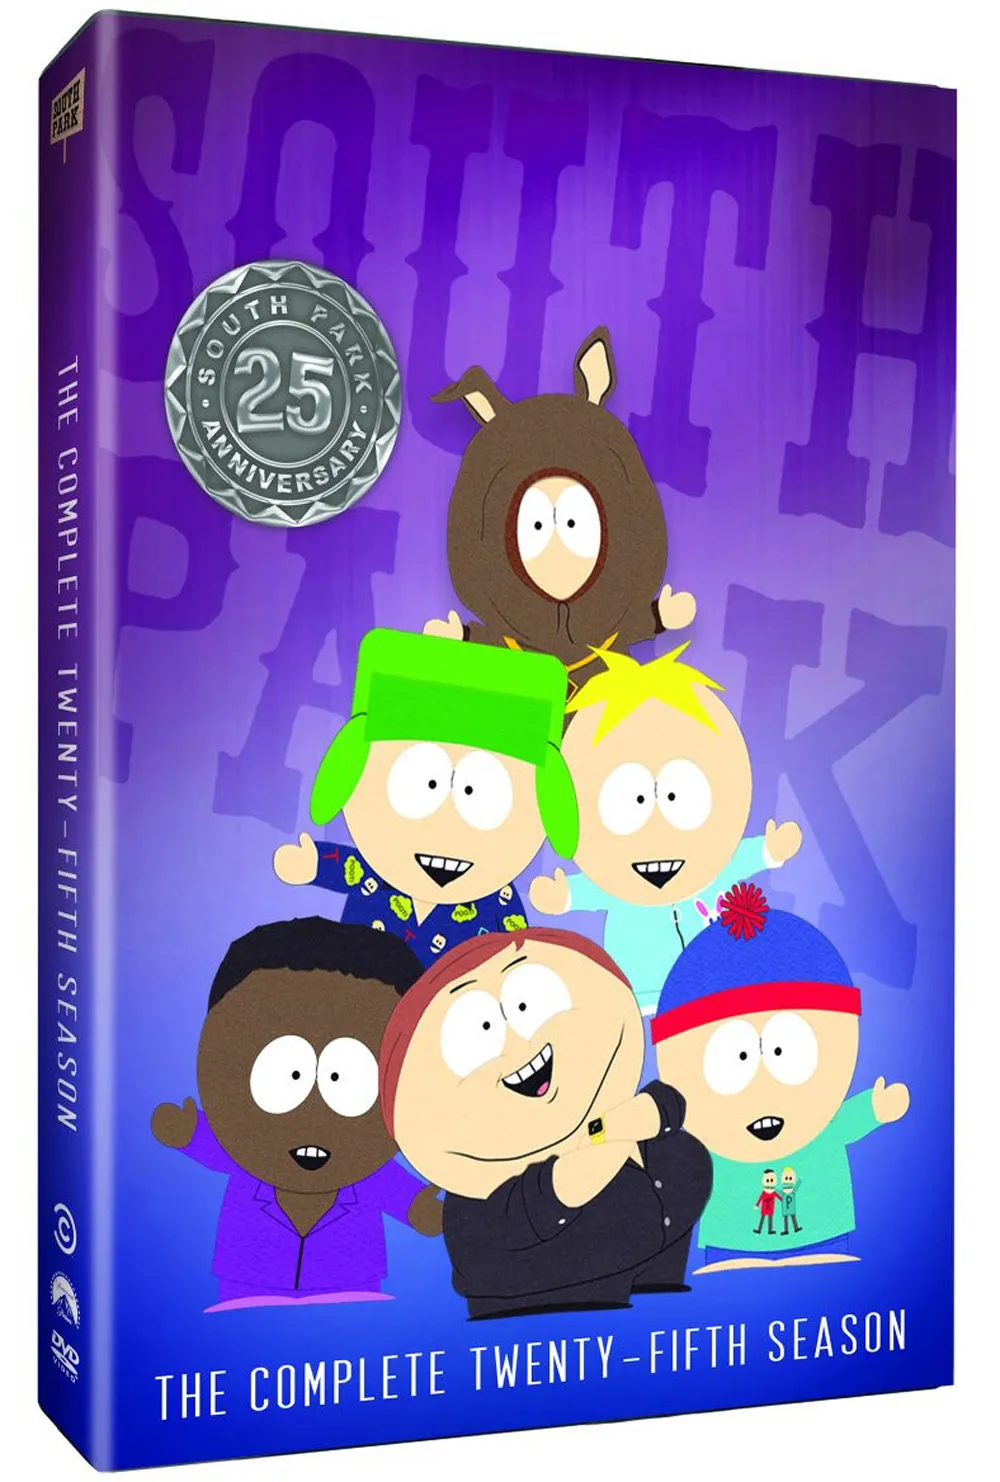 'South Park' Season 25 Bluray and DVD Release Date, Details